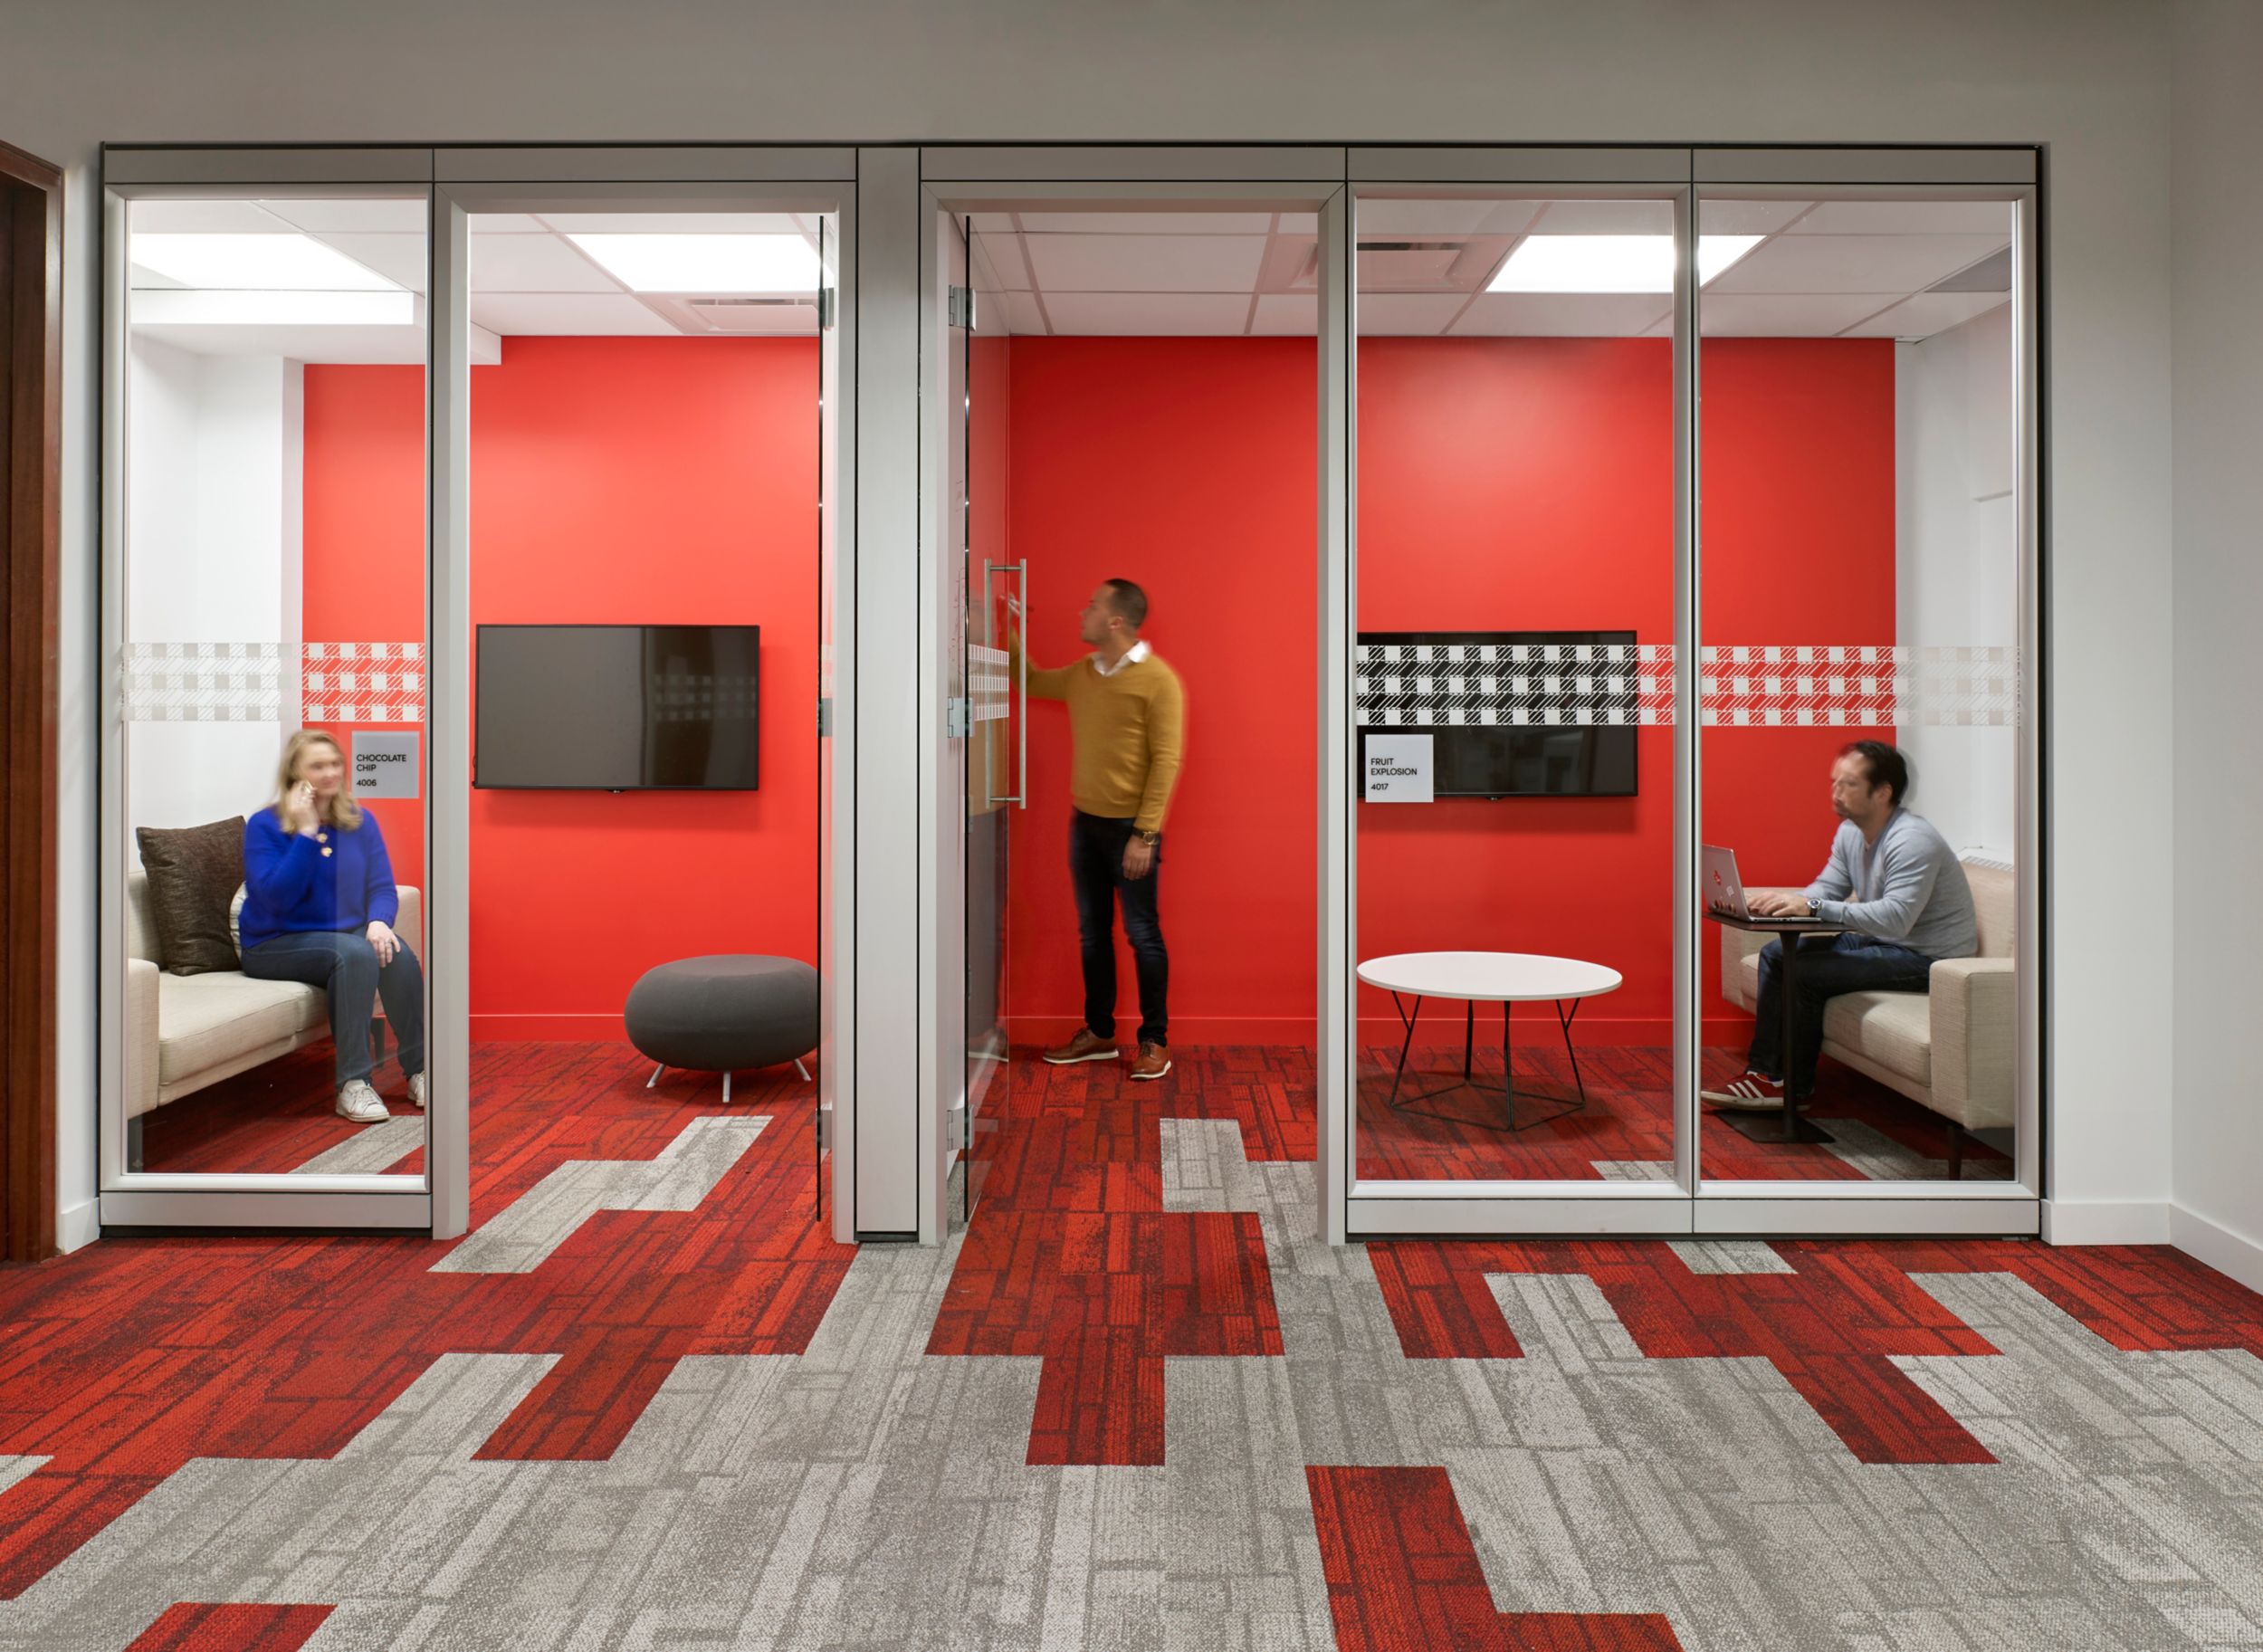 Interface Neighborhood Blocks plank carpet tile in office corridor and small meeting rooms with people working imagen número 7